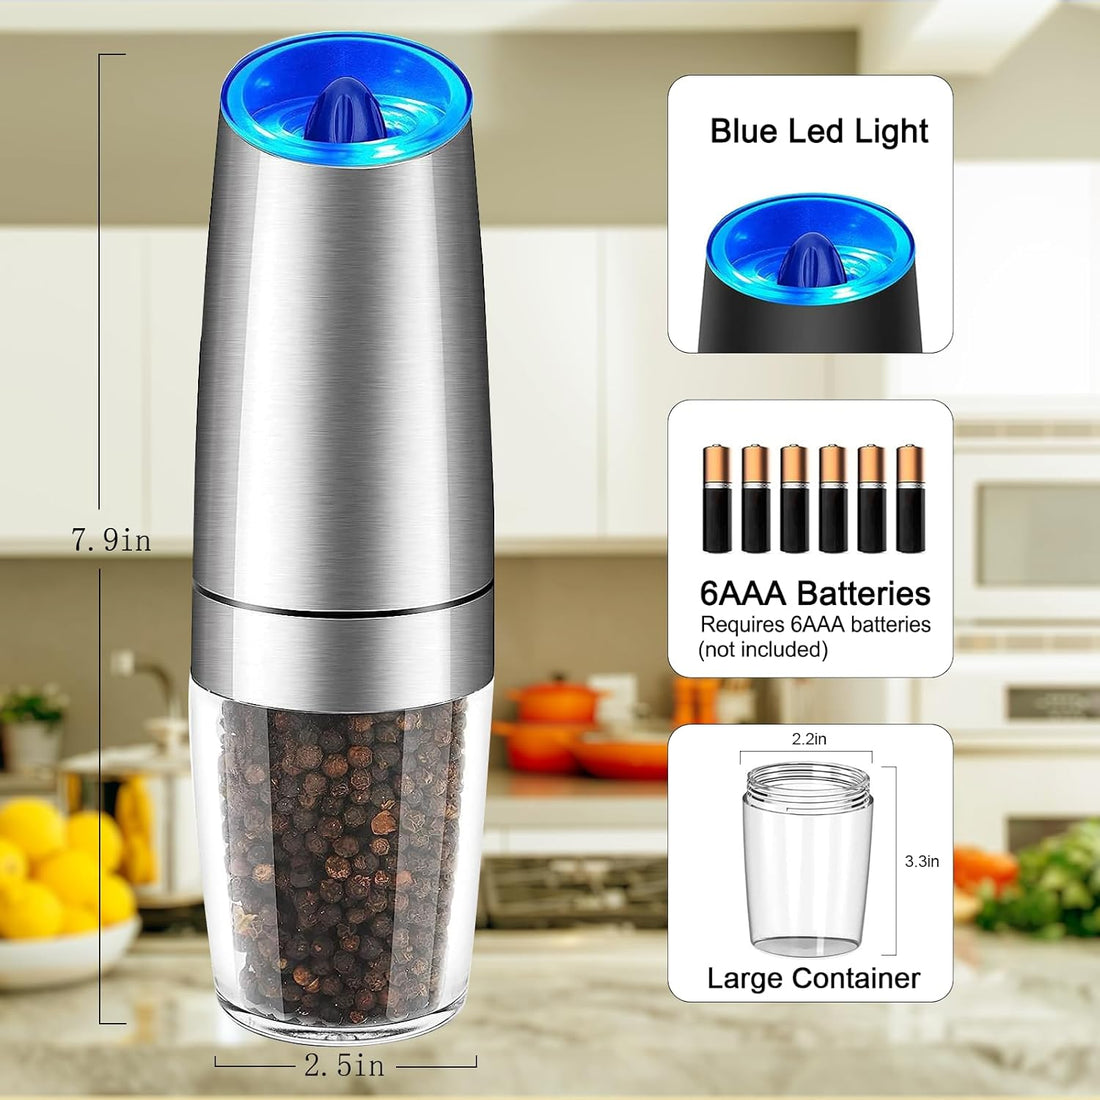 Enutogo Gravity Electric Pepper and Salt Grinder Set, Automatic Pepper Mill with Adjustable Coarseness, Battery Powered with LED Light, One Hand Operation, Stainless Steel, 2 Pack (Silver)